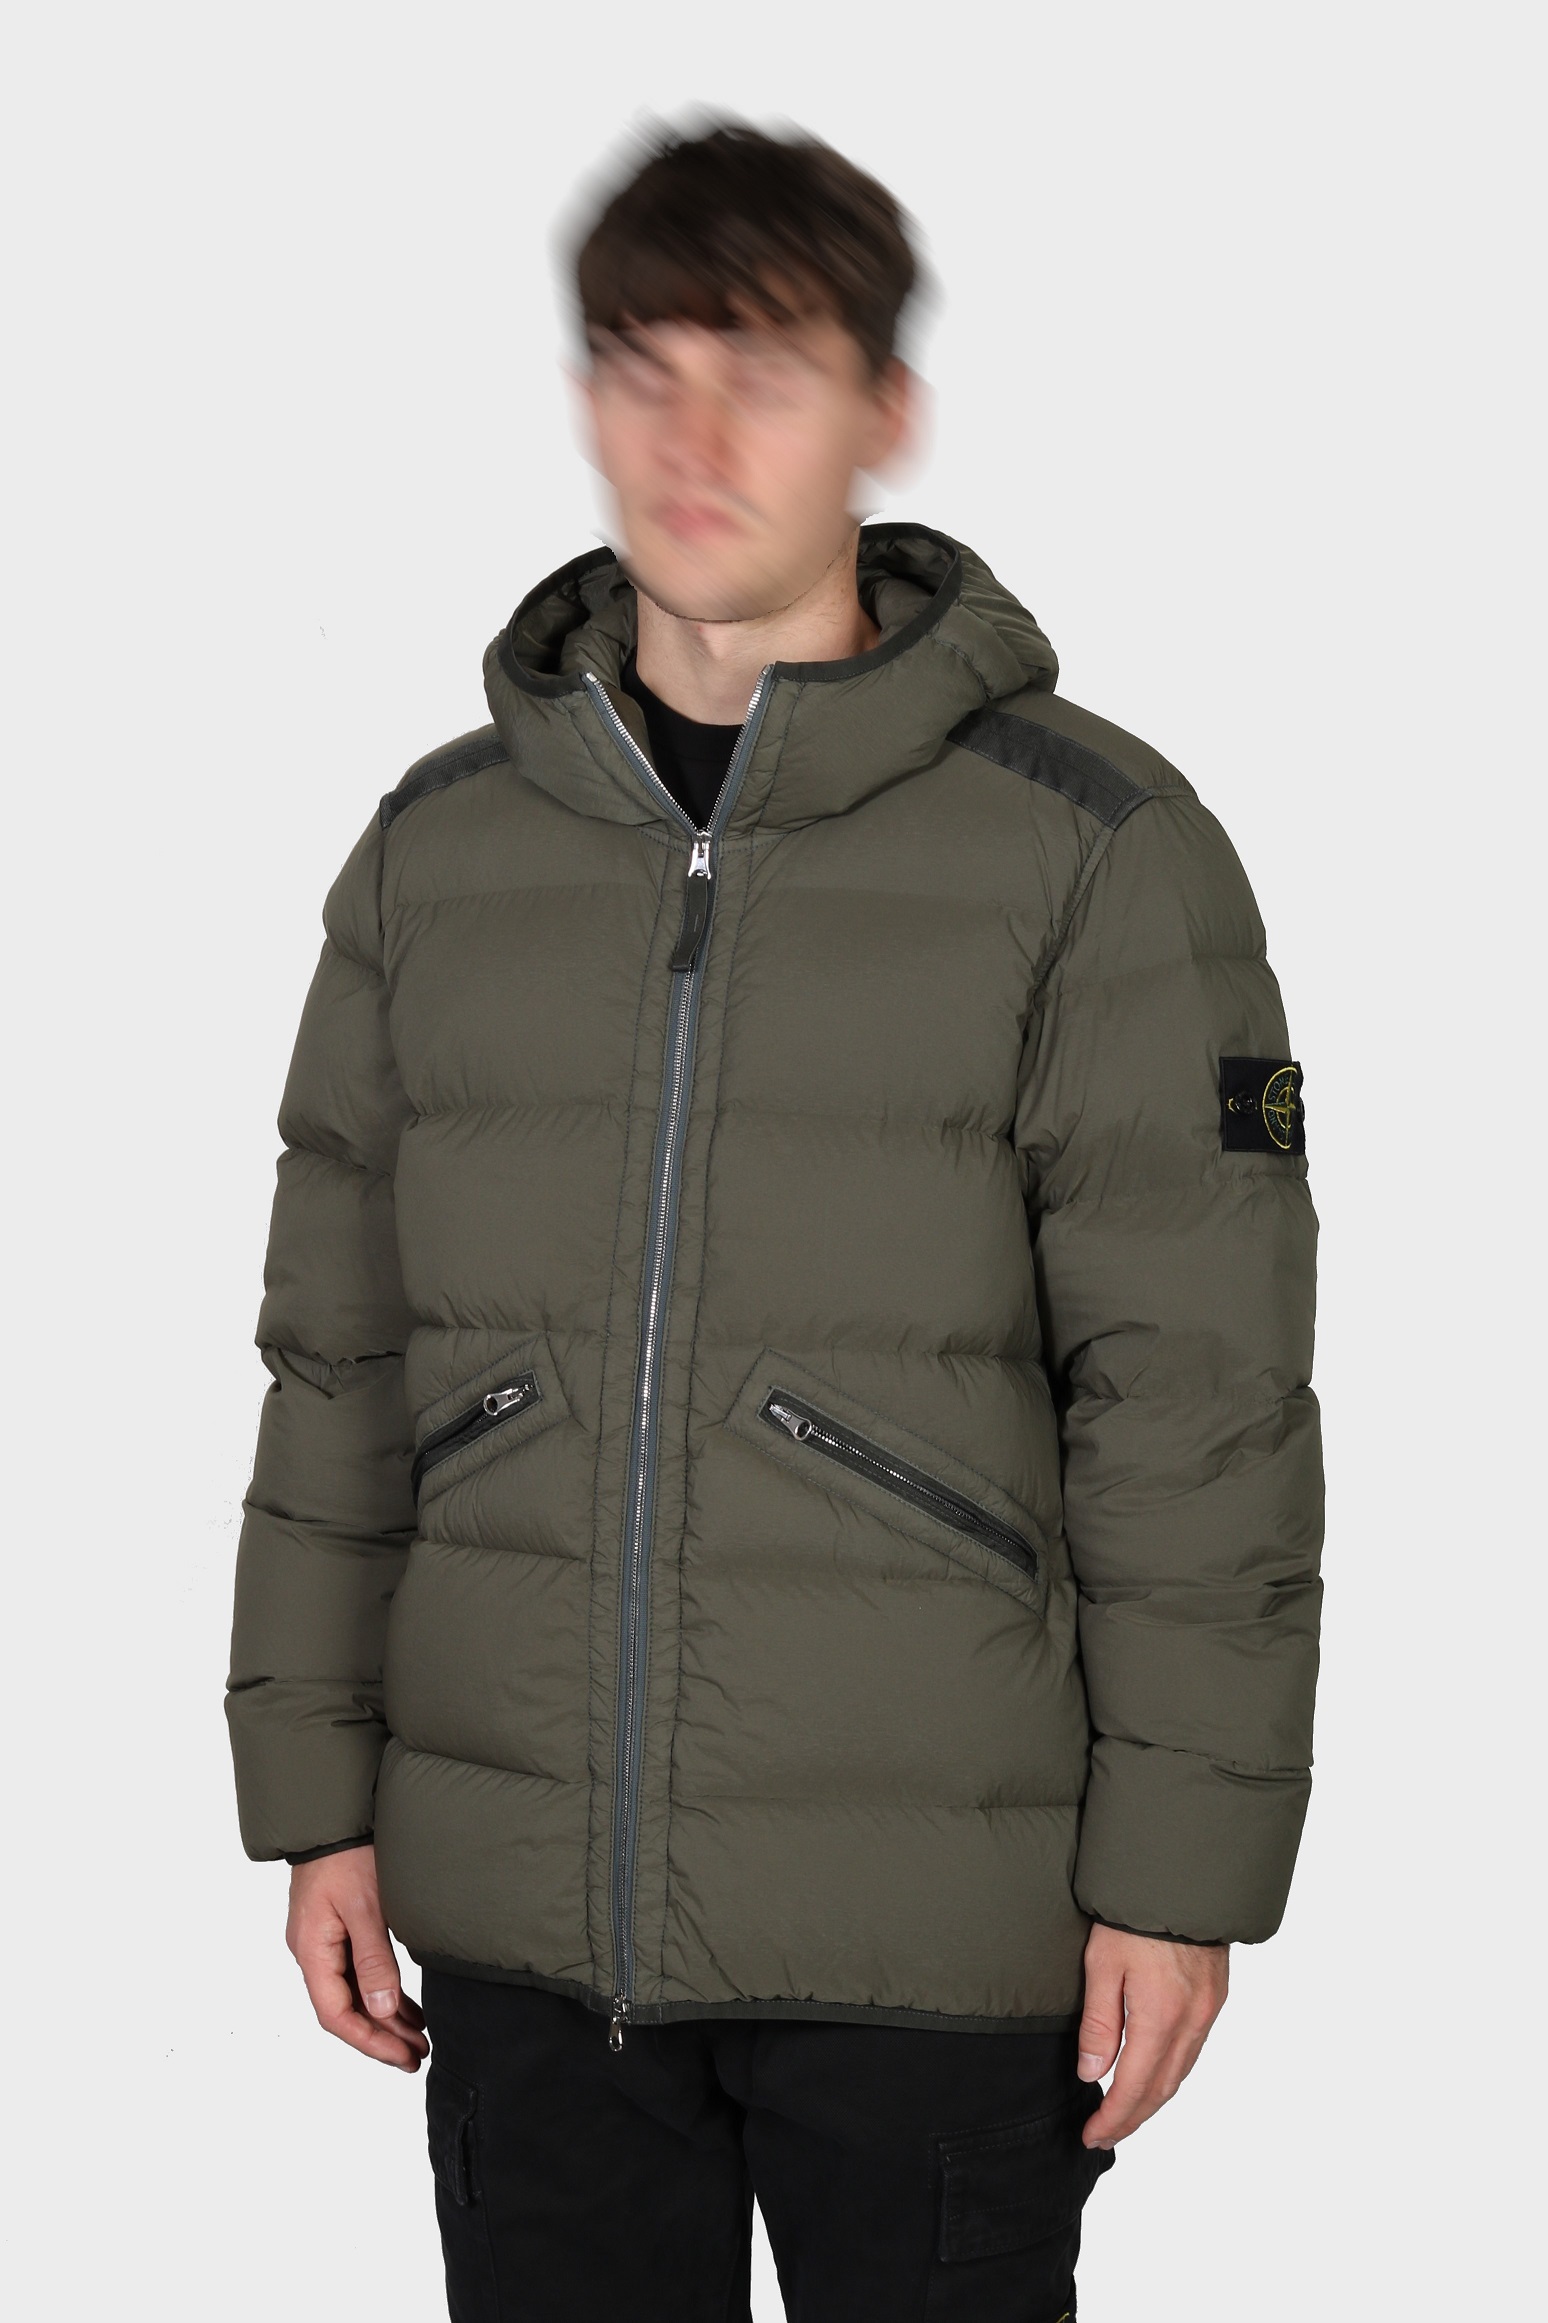 STONE ISLAND Seamless Tunnel Nylon Hooded Down Jacket in Olive